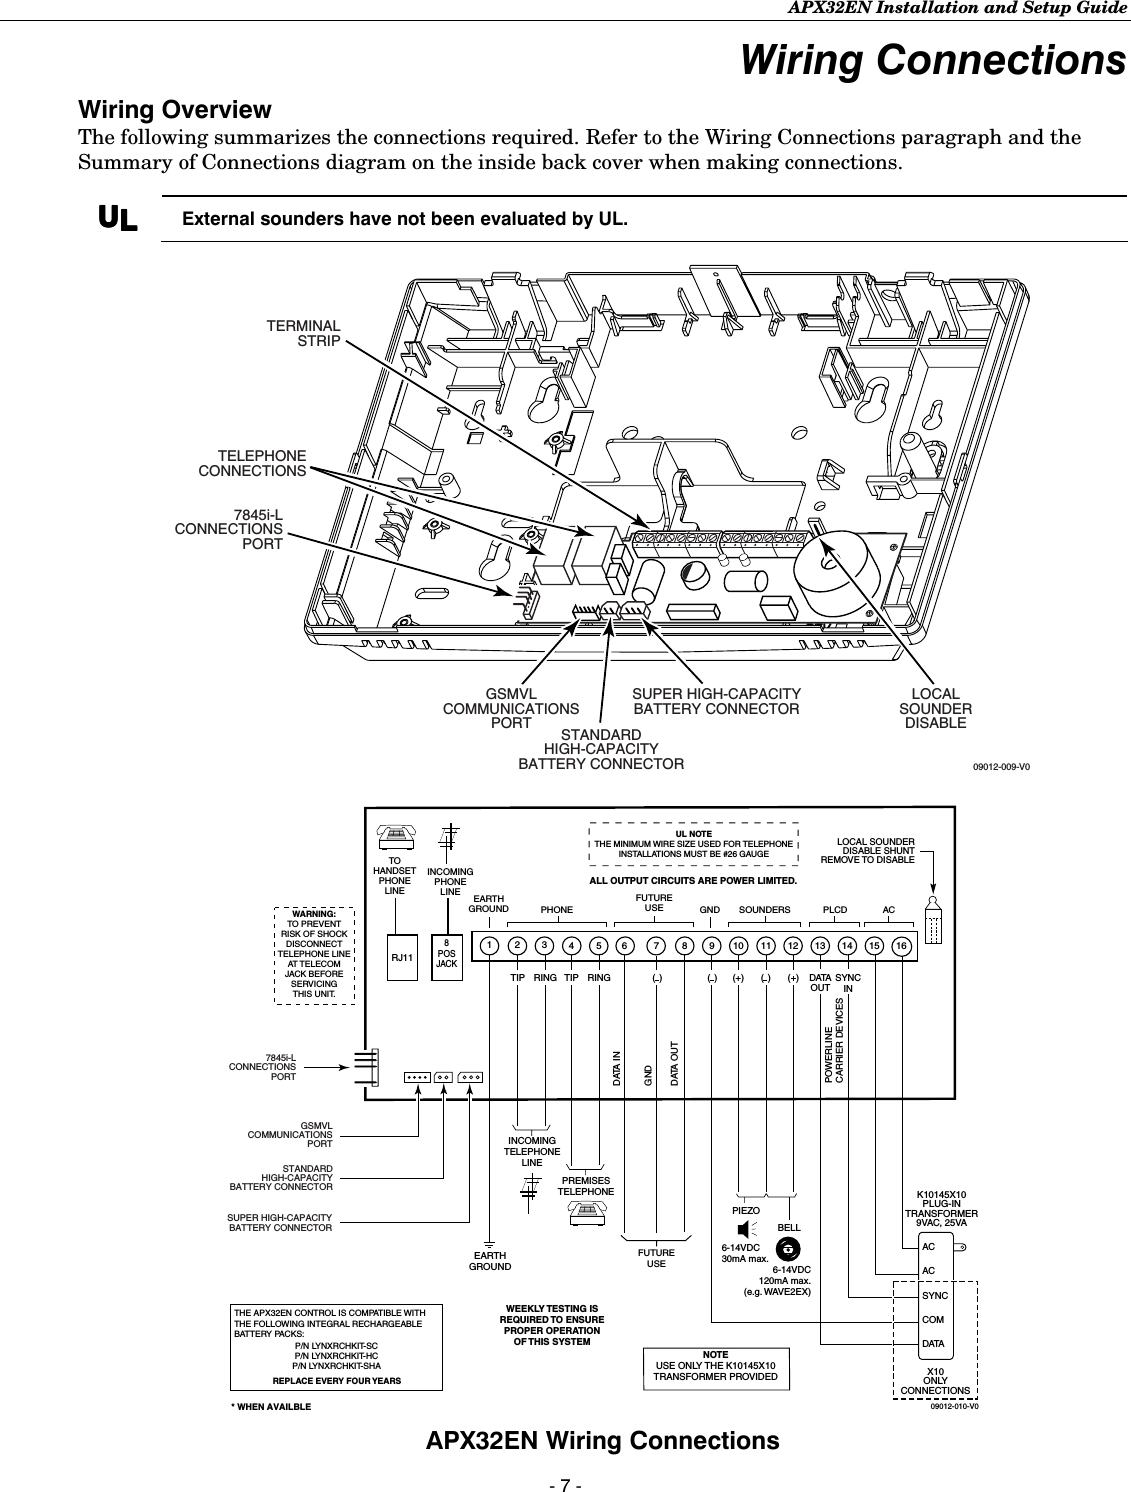 APX32EN Installation and Setup Guide - 7 - Wiring Connections  Wiring Overview The following summarizes the connections required. Refer to the Wiring Connections paragraph and the Summary of Connections diagram on the inside back cover when making connections.  UUUULLLL    External sounders have not been evaluated by UL.  09012-009-V0SUPER HIGH-CAPACITYBATTERY CONNECTORTERMINALSTRIPTELEPHONECONNECTIONS7845i-LCONNECTIONSPORTGSMVLCOMMUNICATIONSPORTLOCALSOUNDERDISABLESTANDARDHIGH-CAPACITYBATTERY CONNECTOR  INCOMINGPHONELINETOHANDSETPHONELINEWARNING:TO PREVENTRISK OF SHOCKDISCONNECTTELEPHONE LINEAT TELECOMJACK BEFORESERVICINGTHIS UNIT.WEEKLY TESTING  ISREQUIRED TO ENSUREPROPER OPERATIONOF THIS SYSTEMALL OUTPUT CIRCUITS ARE POWER LIMITED. PREMISESTELEPHONE1234865 11710 12 15 1613 14PHONEFUTUREUSEFUTUREUSE SOUNDERS PLCD ACEARTHGROUNDEARTHGROUNDINCOMINGTELEPHONELINERINGTIPRINGTIP ( ) ( ) (+)(+)( )PIEZO6-14VDC120mA max.(e.g. WAVE2EX)6-14VDC30mA max.DATAOUTSYNCINPOWERLINECARRIER DEVICESRJ118POSJACKACACSYNCCOMDATA9BELL09012-010-V0NOTEUSE ONLY THE K10145X10TRANSFORMER PROVIDEDK10145X10PLUG-INTRANSFORMER9VAC, 25VAX10ONLYCONNECTIONSGNDDATA  INGNDDATA OUTLOCAL SOUNDERDISABLE SHUNTREMOVE TO DISABLETHE APX32EN CONTROL IS COMPATIBLE WITHTHE FOLLOWING INTEGRAL RECHARGEABLEBATTERY PACKS:REPLACE EVERY FOUR YEARSP/N LYNXRCHKIT-SCP/N LYNXRCHKIT-HCP/N LYNXRCHKIT-SHA* WHEN AVAILBLEUL NOTETHE MINIMUM WIRE SIZE USED FOR TELEPHONEINSTALLATIONS MUST BE #26 GAUGESUPER HIGH-CAPACITYBATTERY CONNECTOR7845i-LCONNECTIONSPORTGSMVLCOMMUNICATIONSPORTSTANDARDHIGH-CAPACITYBATTERY CONNECTOR APX32EN Wiring Connections